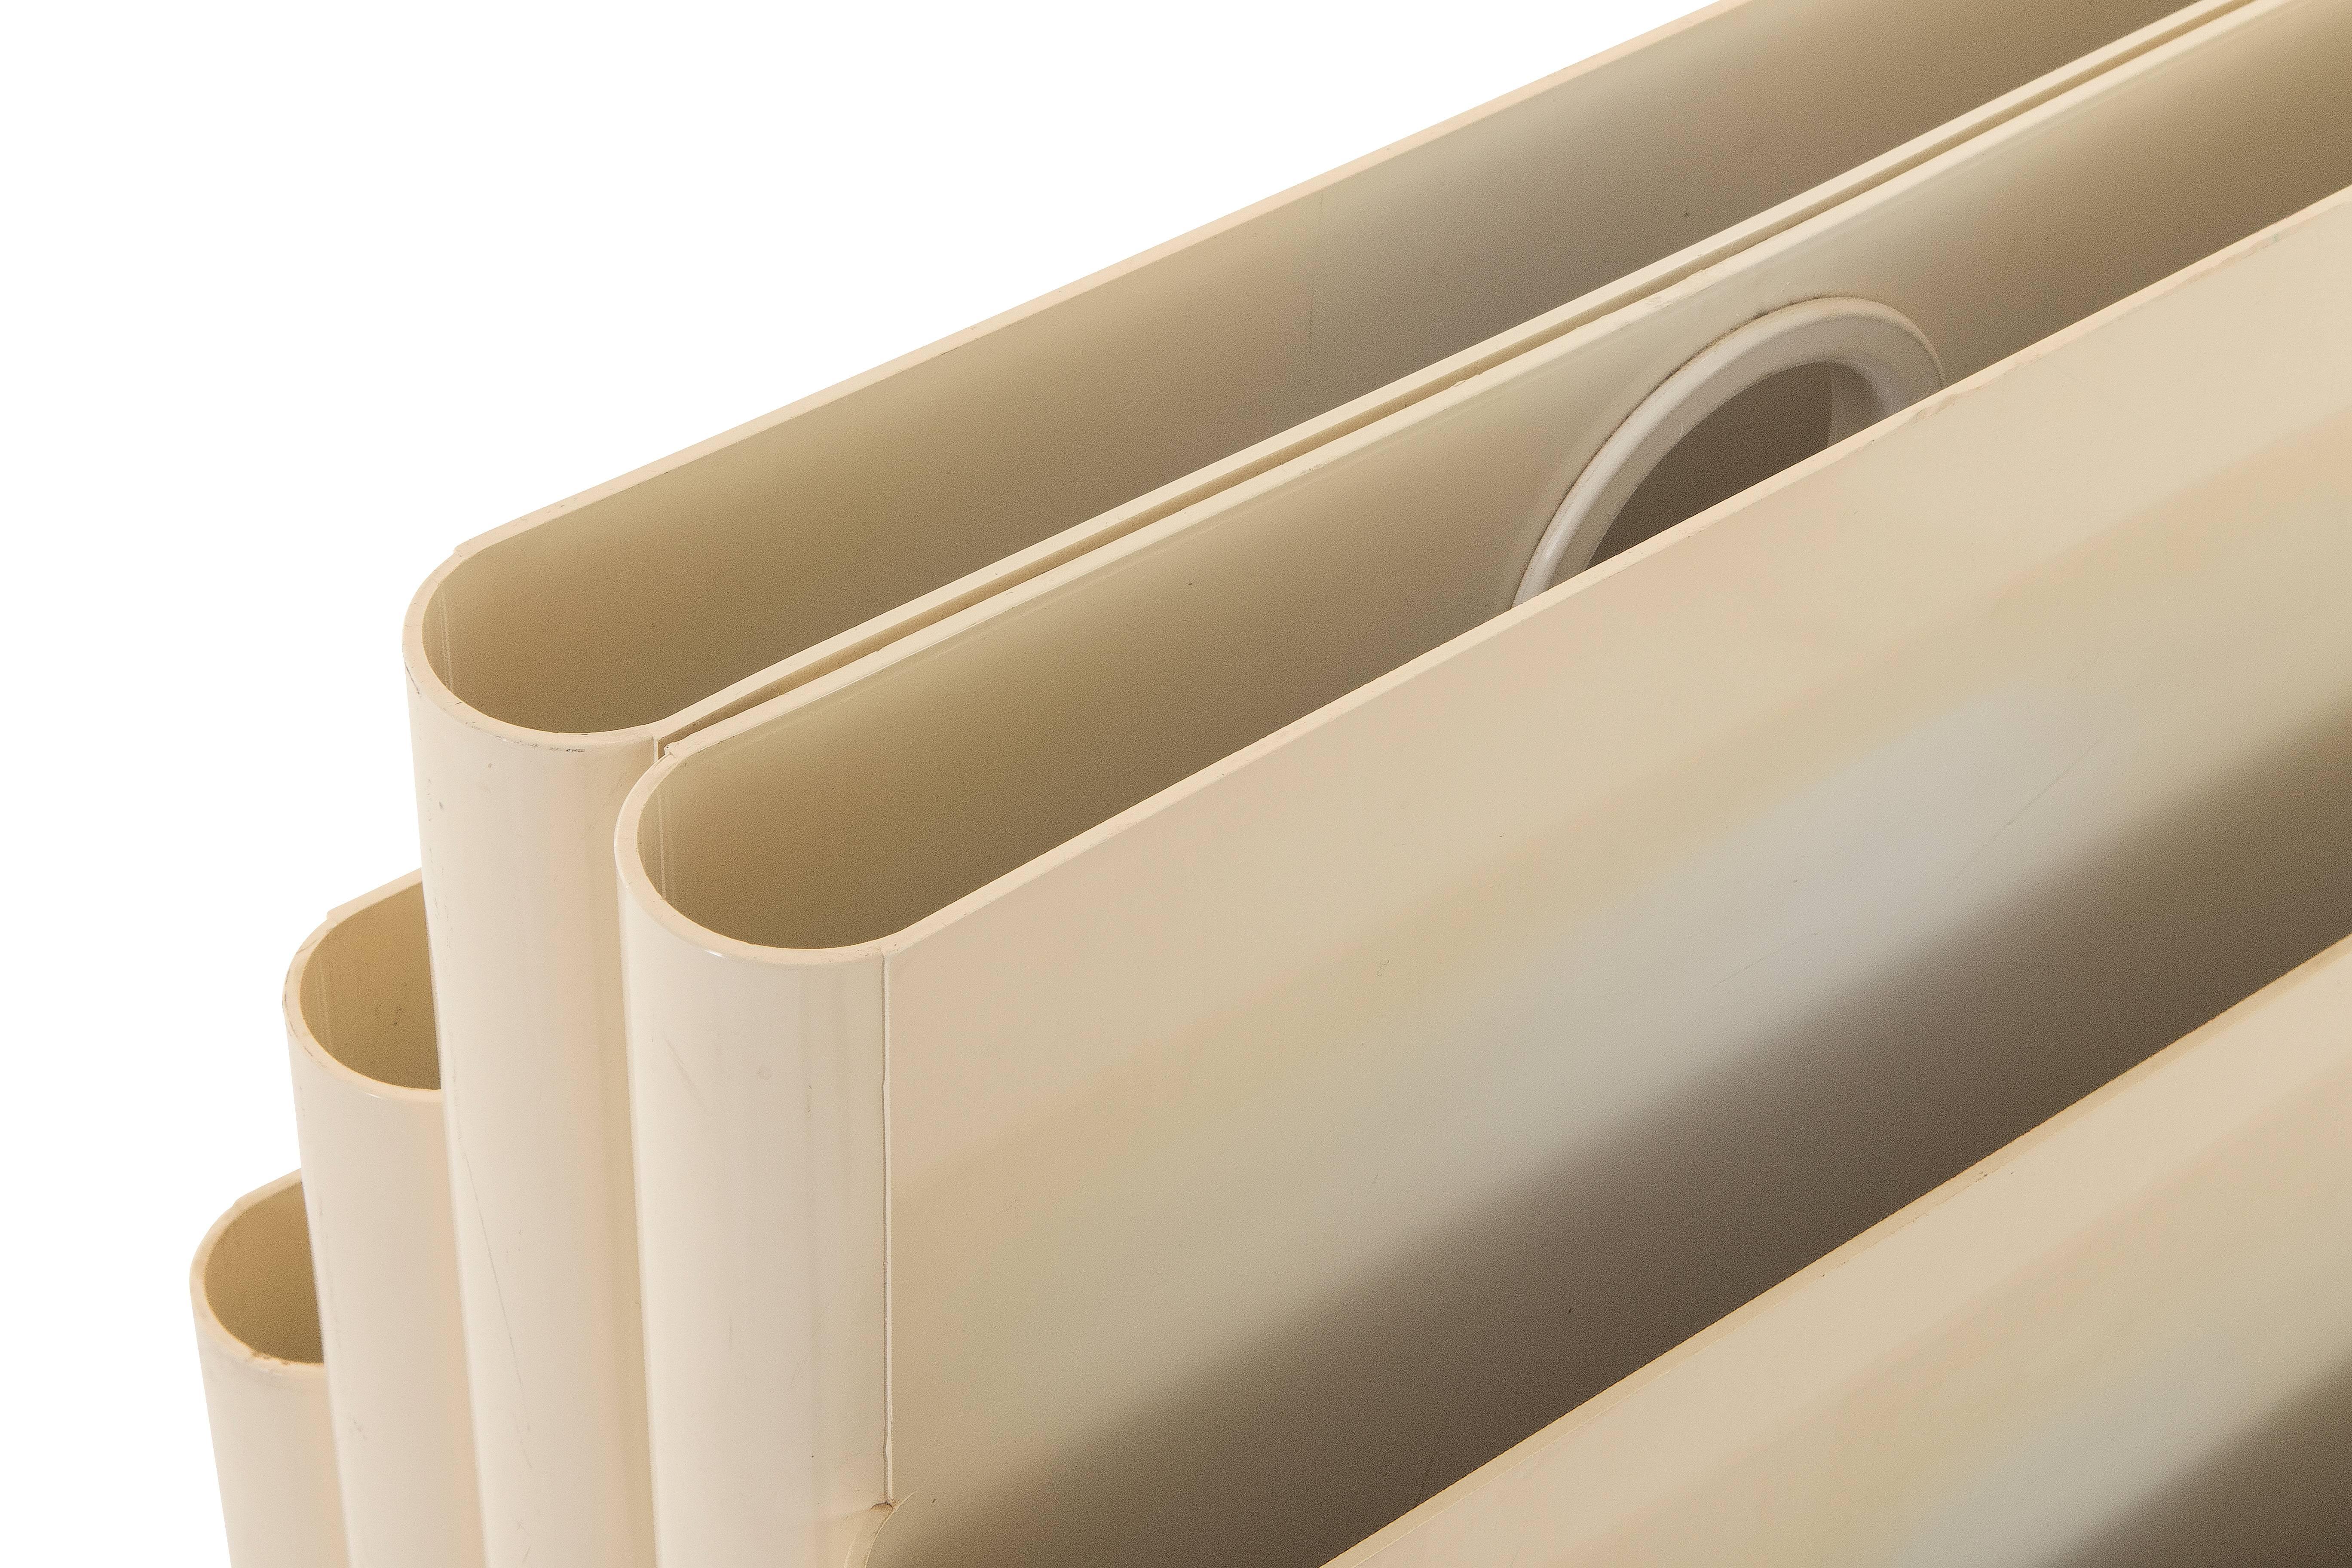 Six pocket magazine rack, Kartell model 4675, designed by Giotto Stoppino in 1972. Central handle makes for easy carrying, in off-white color. Material used is resin/polyester mix.
 